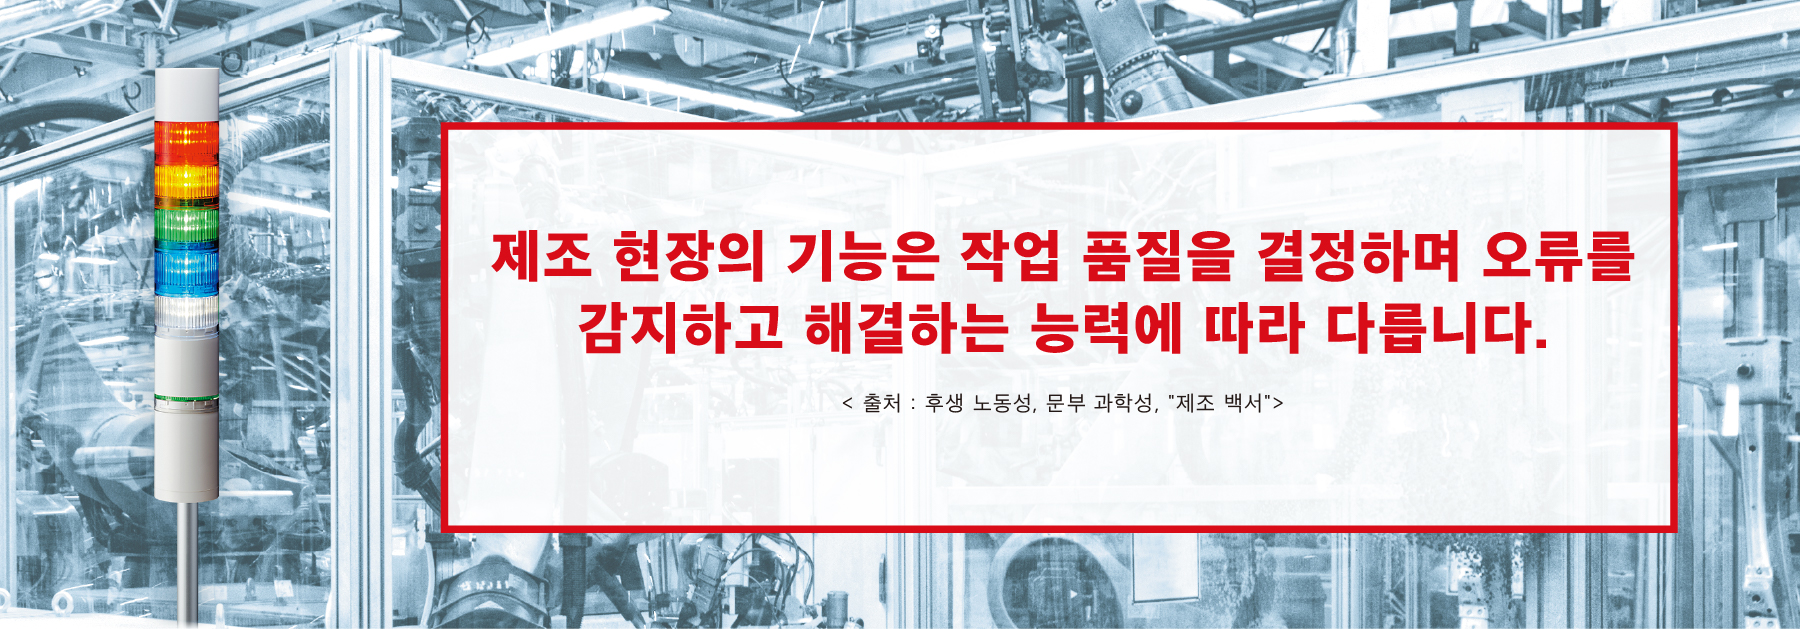 On-site power is the basis of Japan's manufacturing through the accumulation of the power to discover and solve problems.